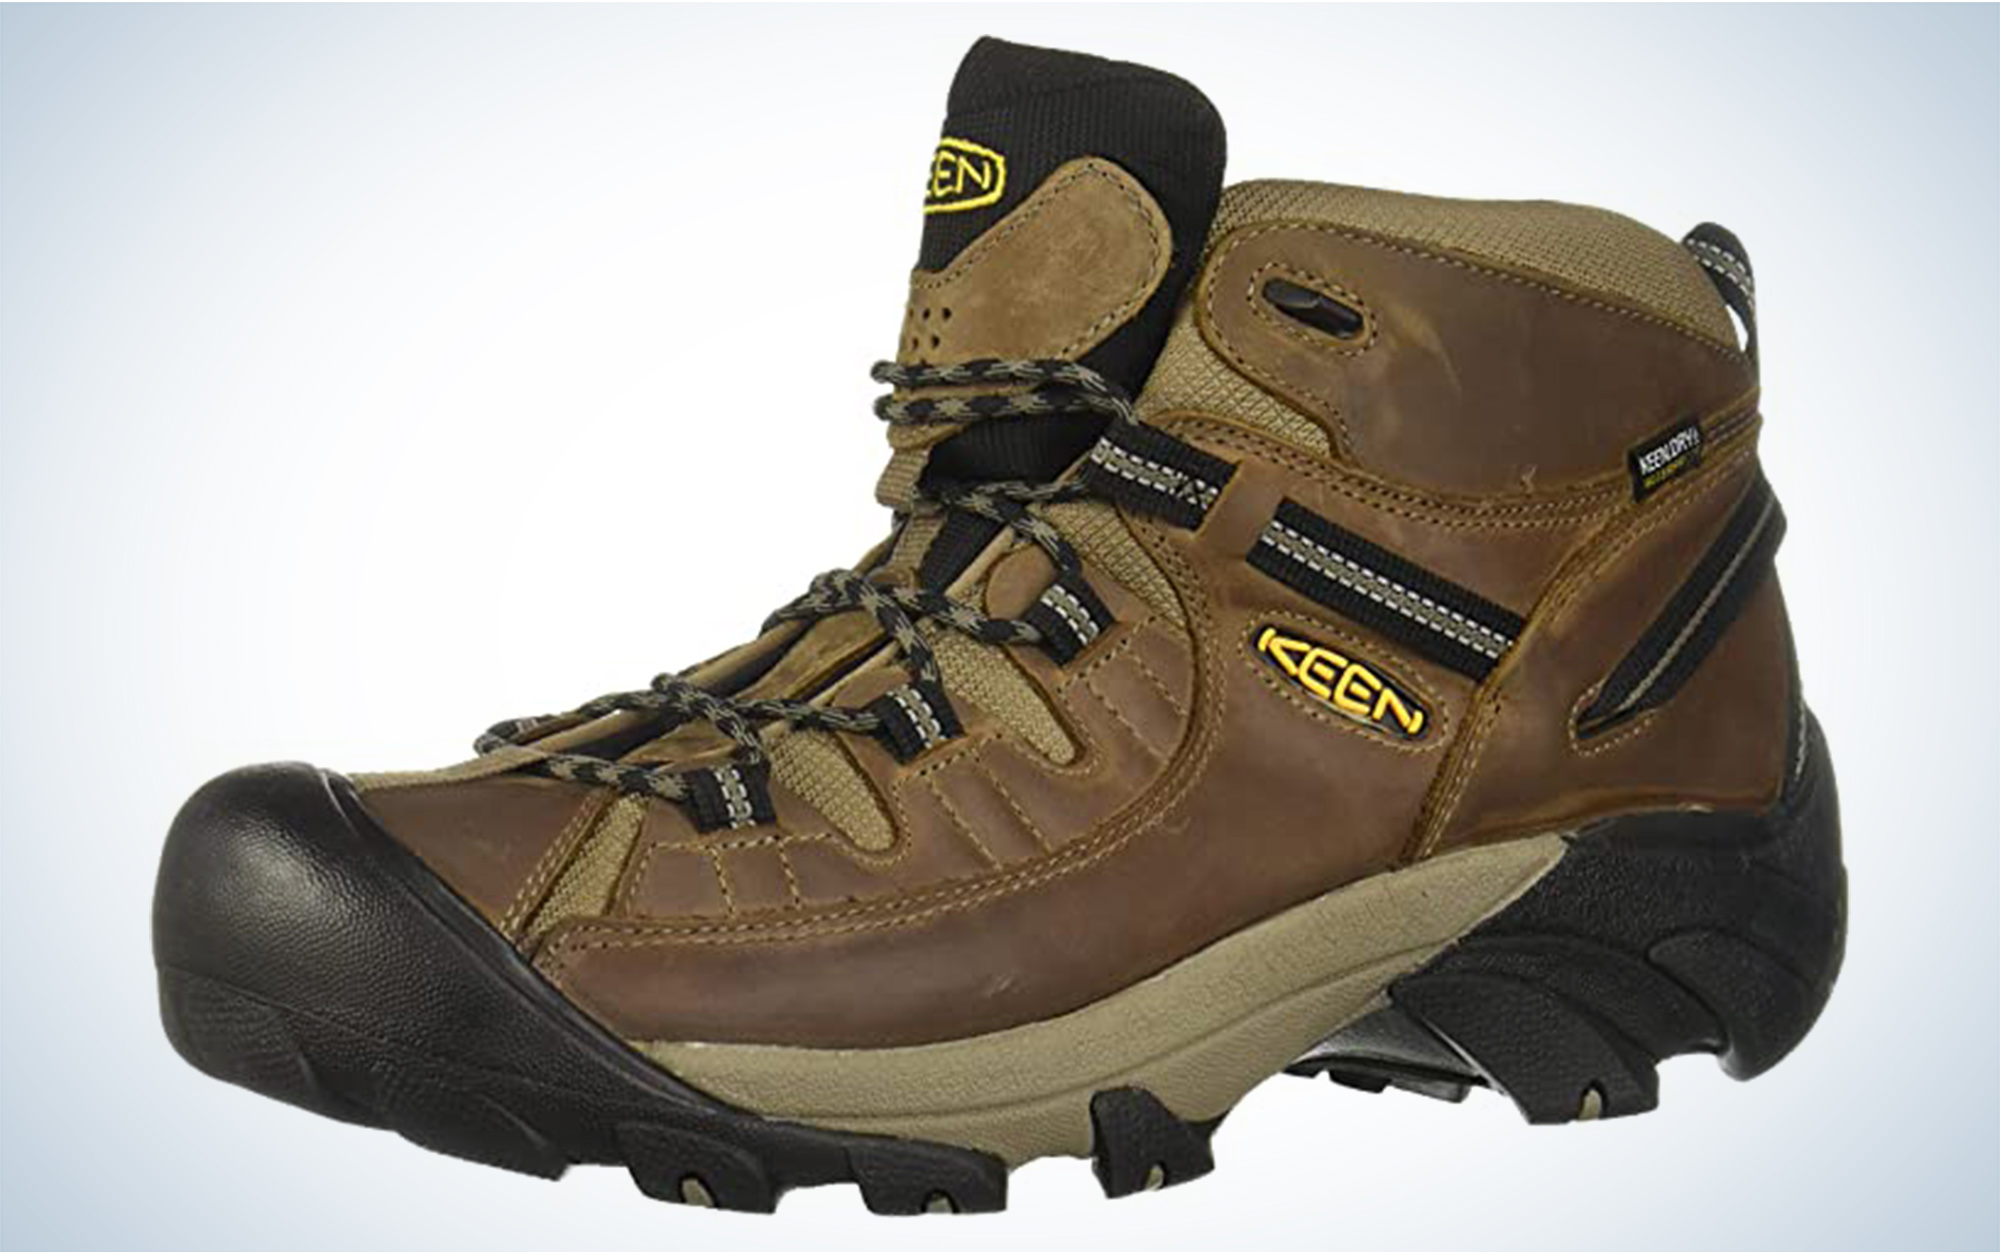 Keen's mid-top hiking shoe is on sale.